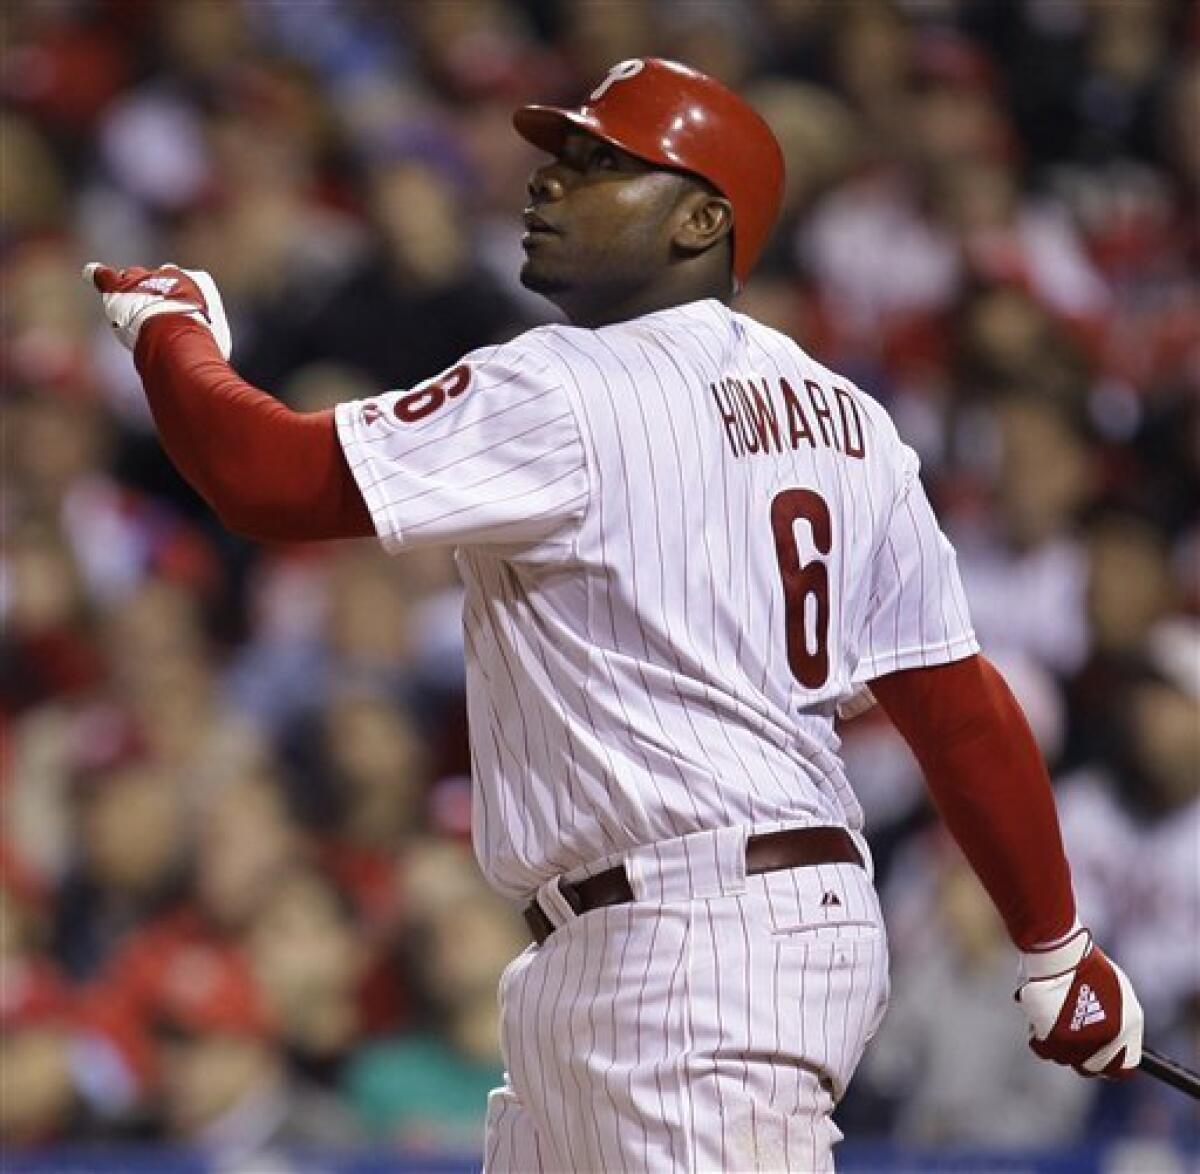 Ryan Howard, Phillies agree on 3-year contract - The San Diego Union-Tribune